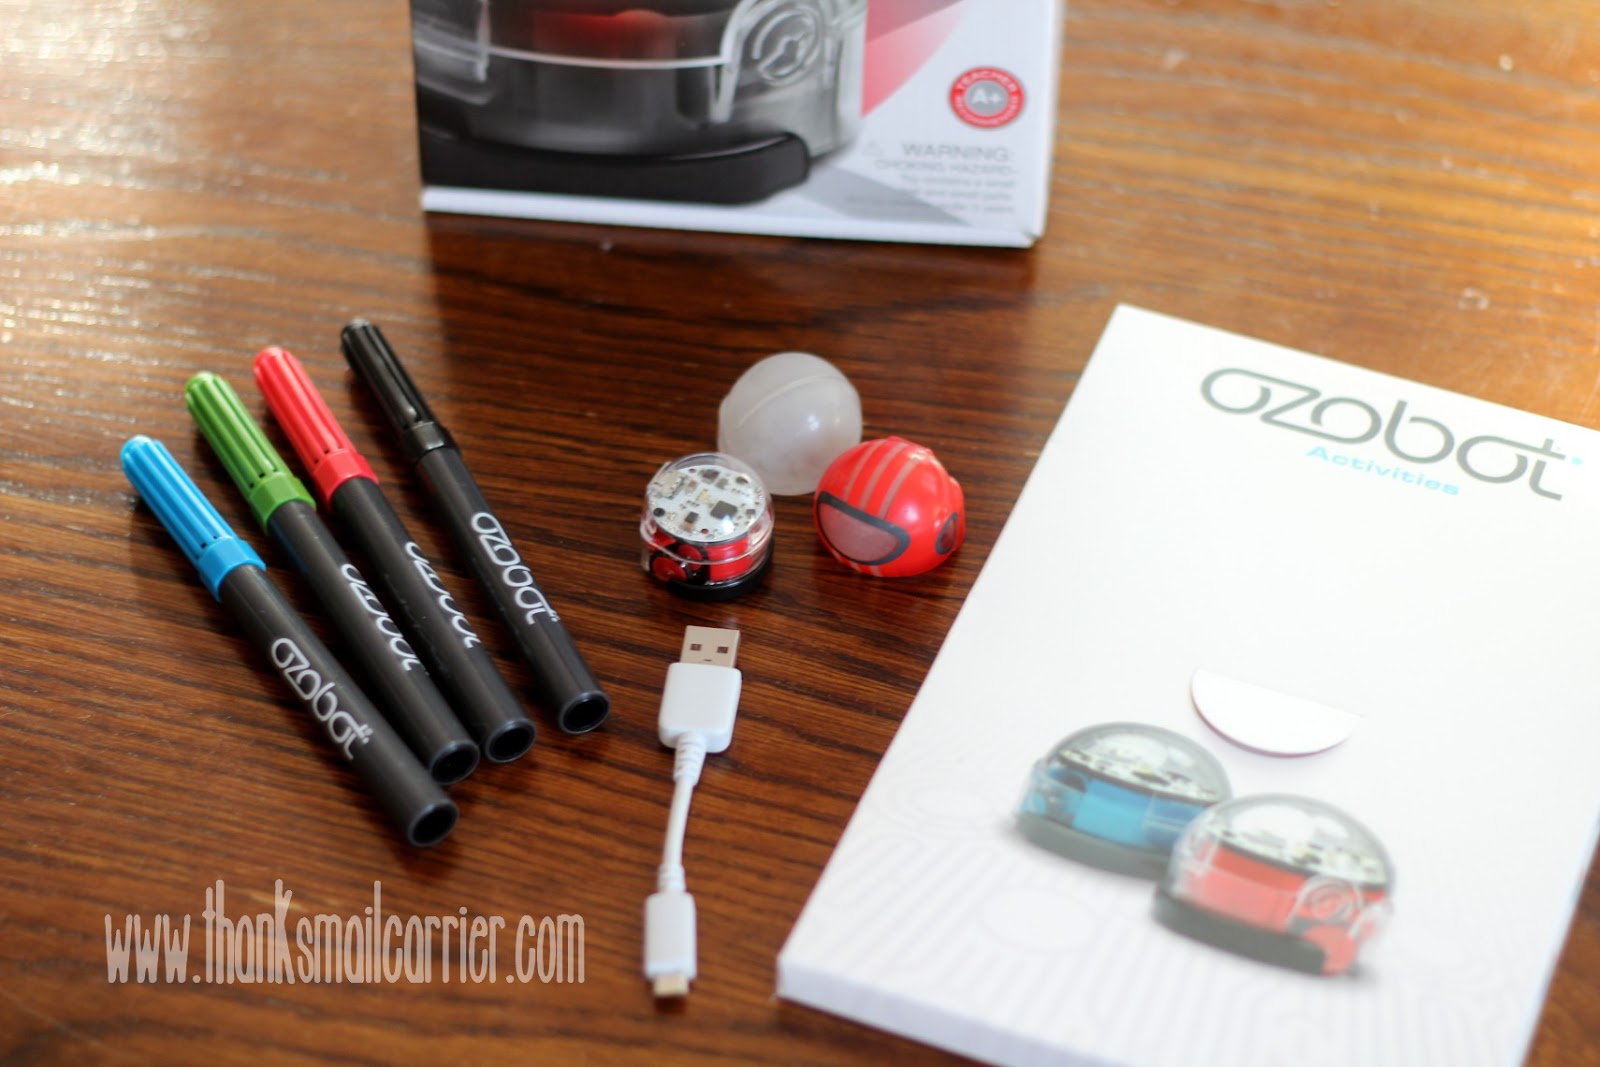 Ozobot Starter Pack contents